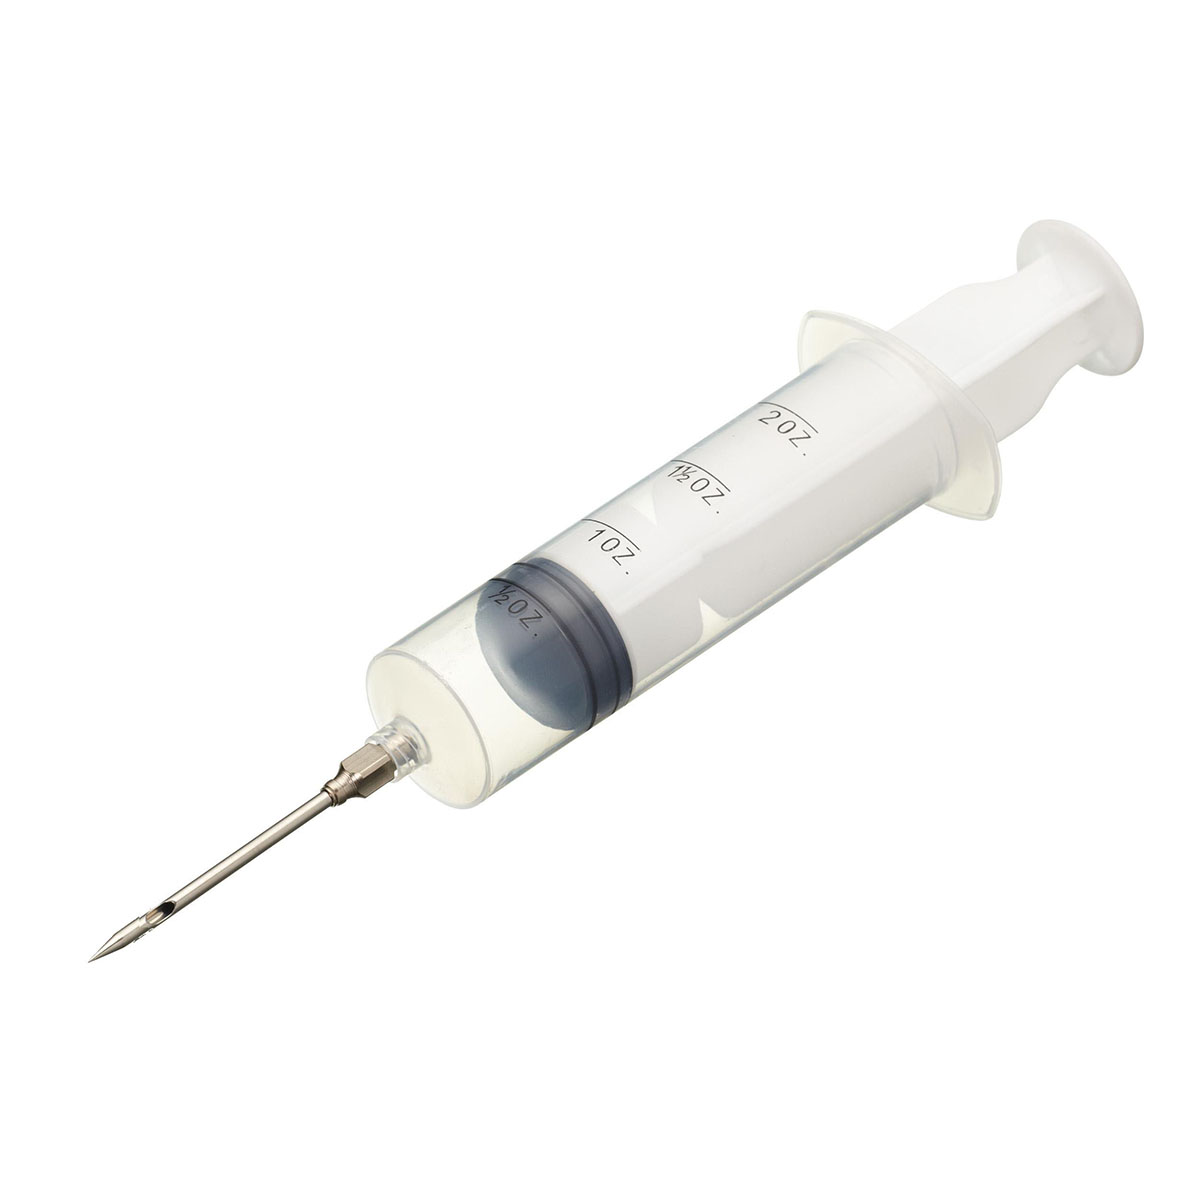 Picture of 21 Century B71A2 2 oz Plastic Injector Stainless Steel Needle